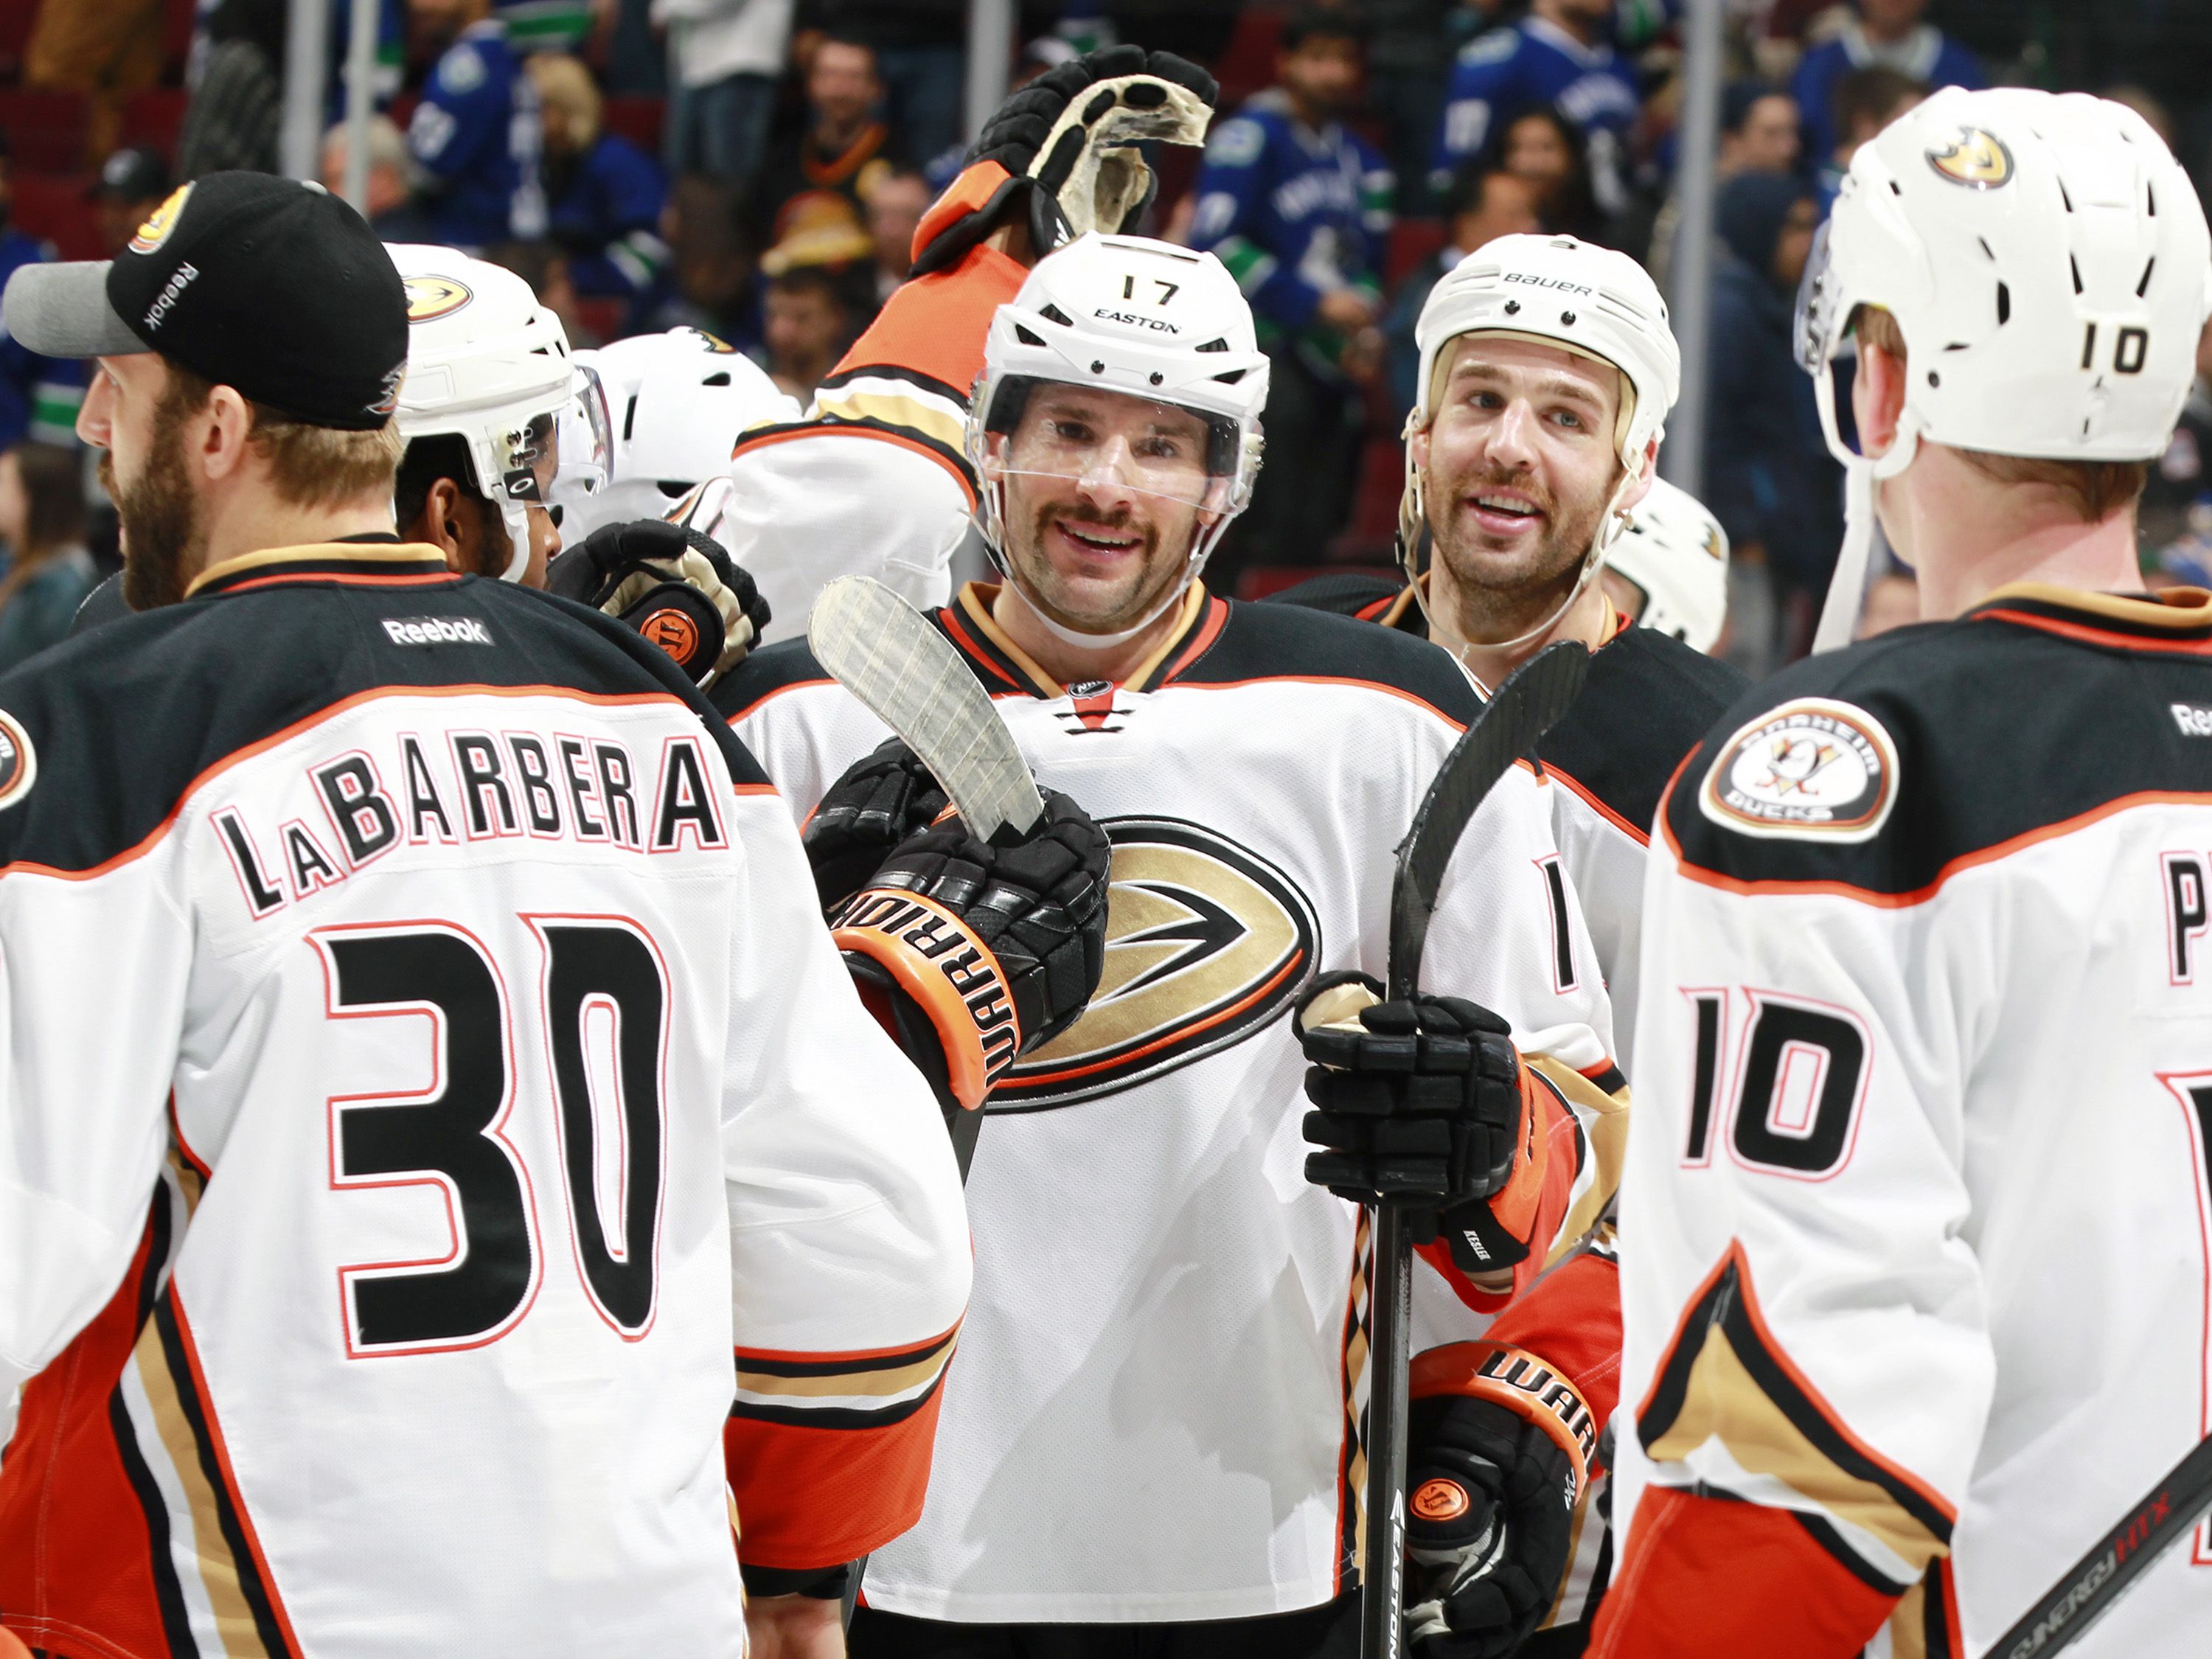 VANCOUVER, BC - NOVEMBER 20: Ryan Kesler #17 and the Anaheim Ducks celebrate a victory over the Vancouver Canucks in their NHL game at Rogers Arena November 20, 2014 in Vancouver, British Columbia, Canada. Anaheim won 4-3 in a shootout. (Photo by Jeff Vinnick/NHLI via Getty Images)